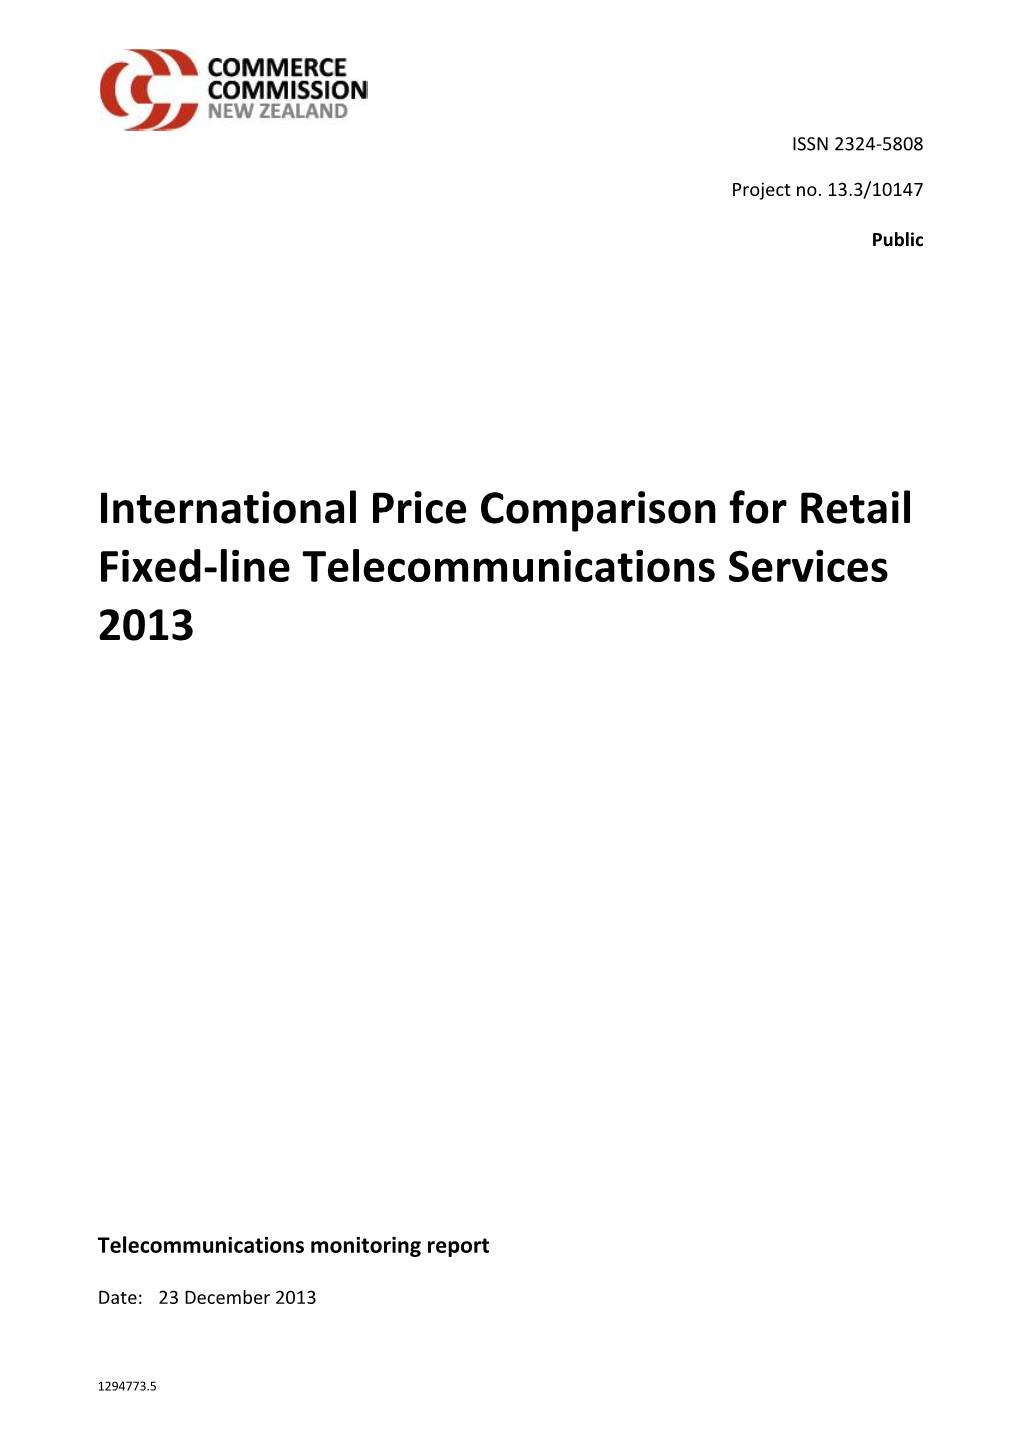 International Price Comparison for Retail Fixed-Line Telecommunications Services 2013